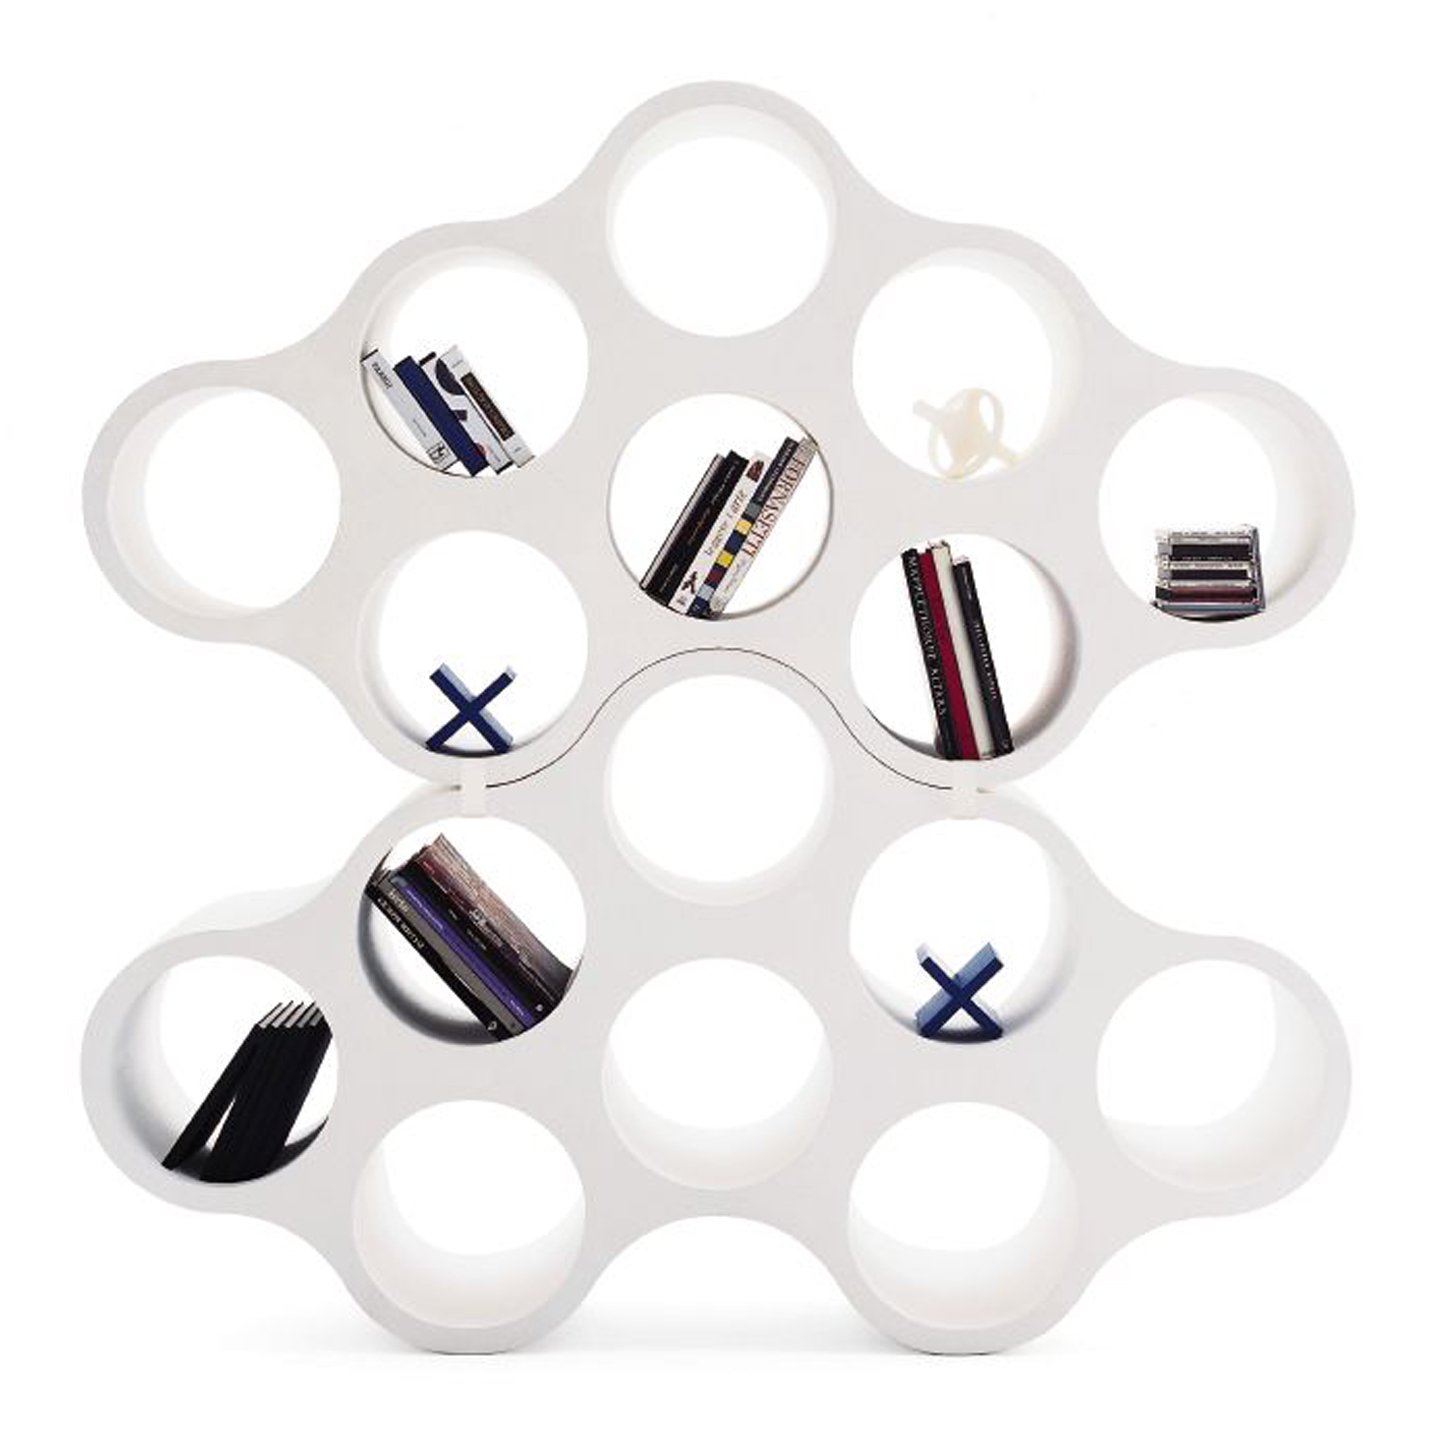 Cloud shelf in white with books on shelves. 